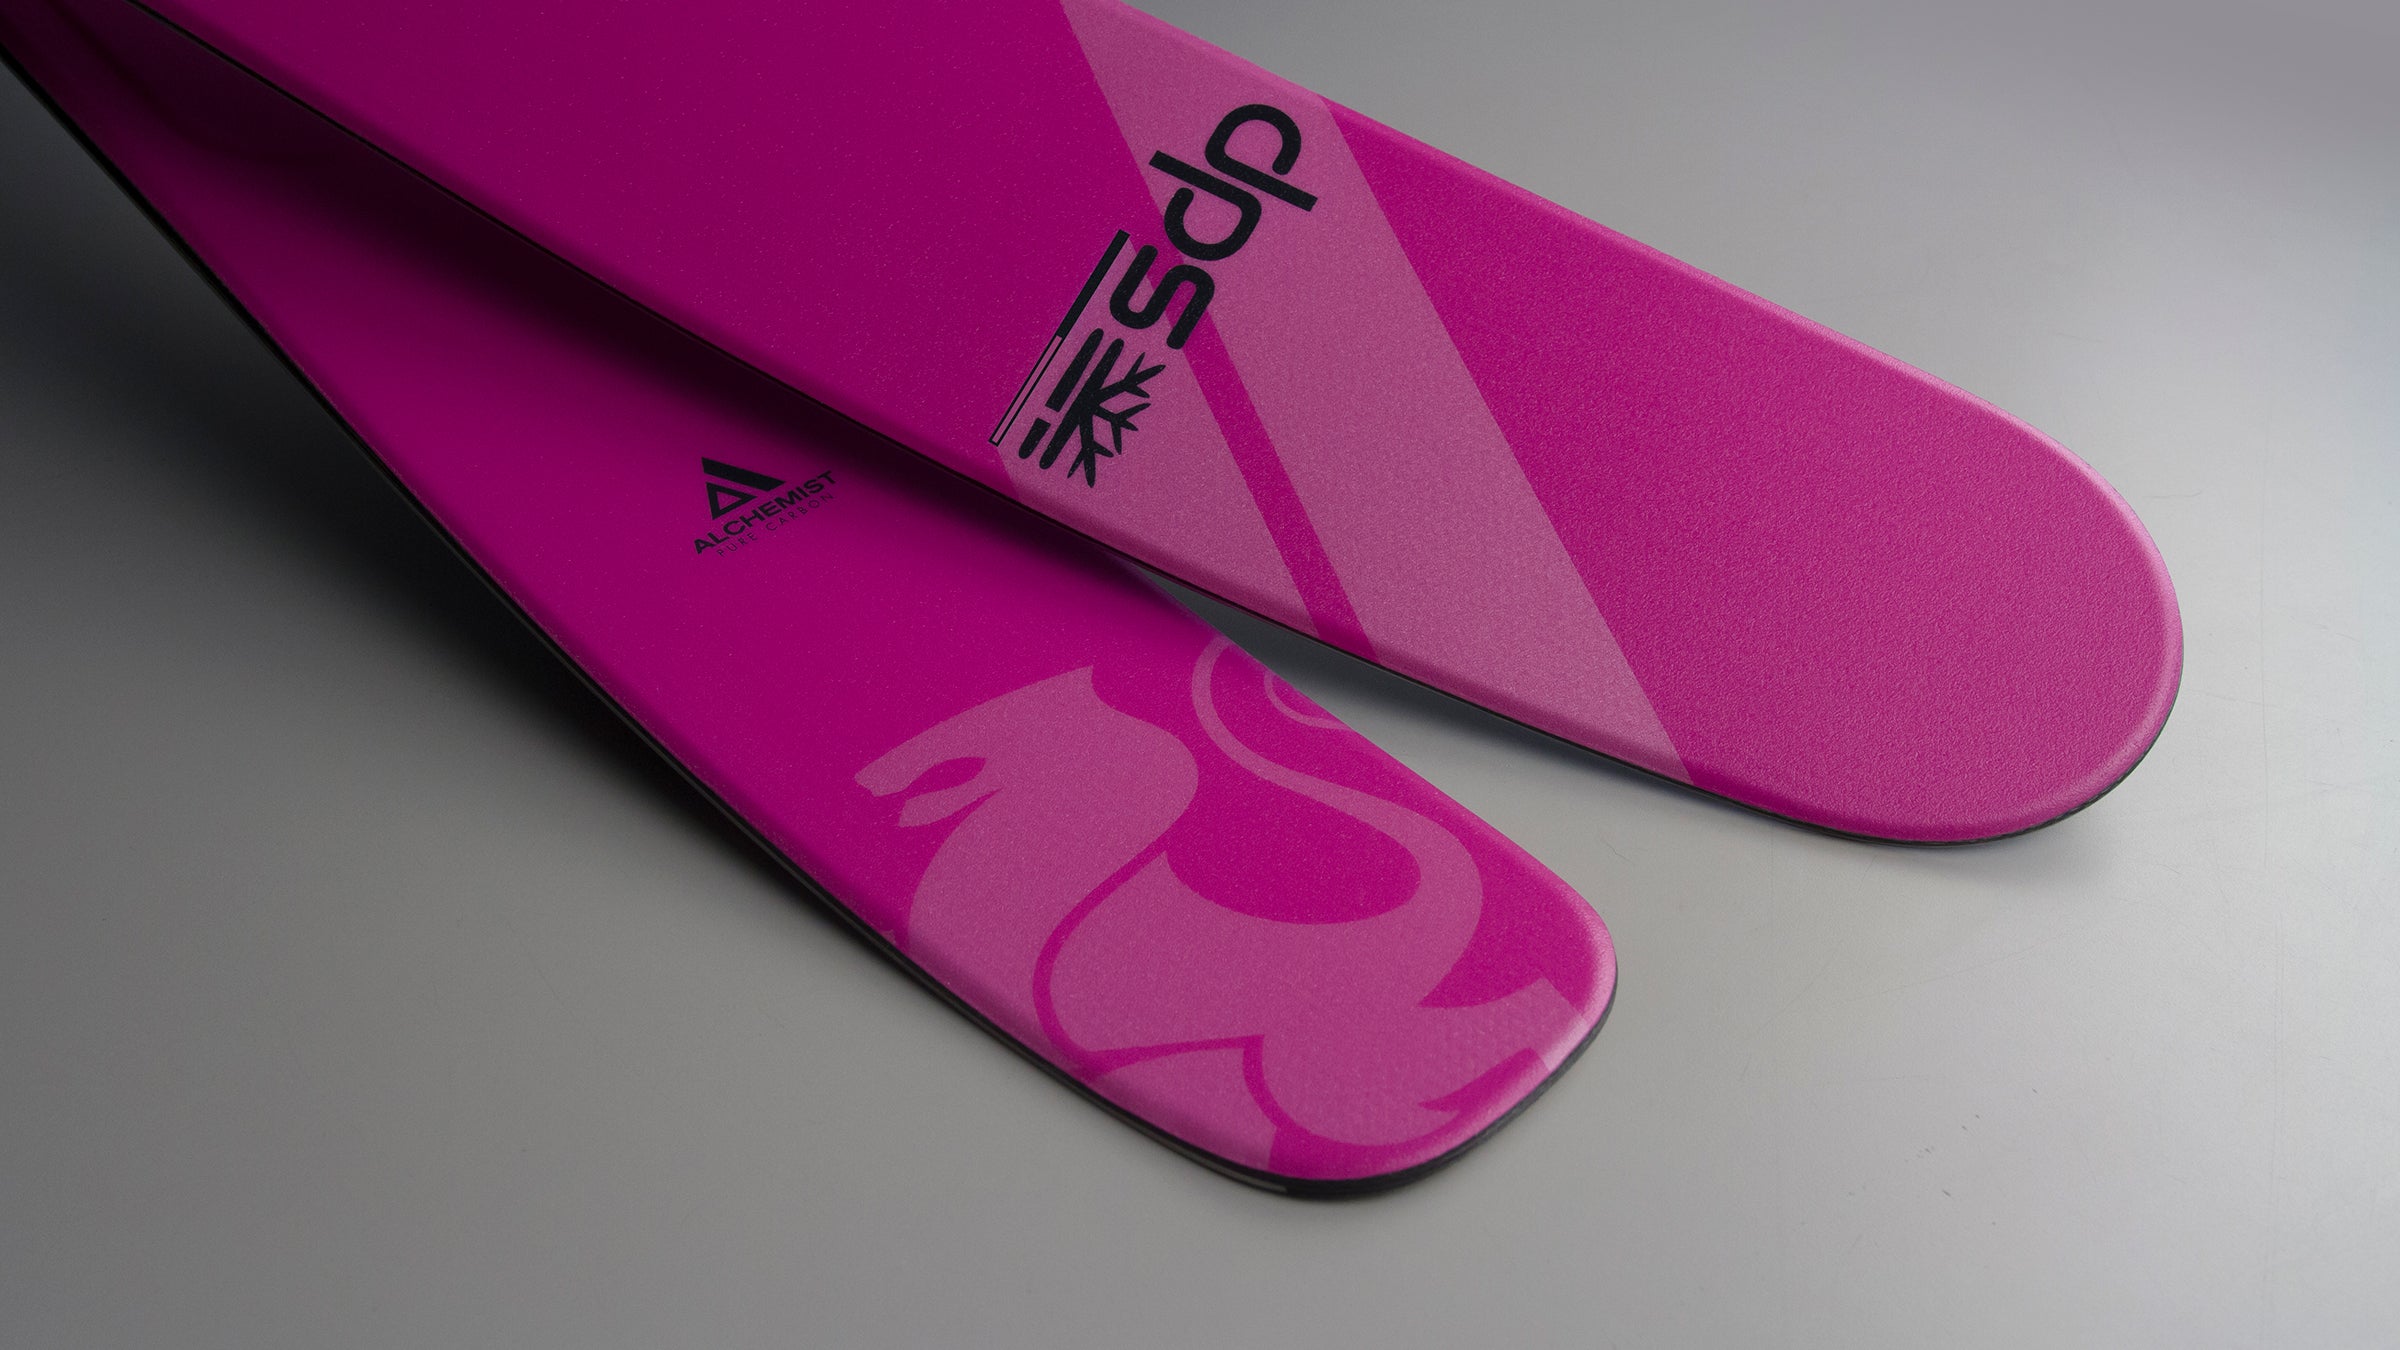 The DPS Yvette A112 Is the Perfect Women's Powder Ski